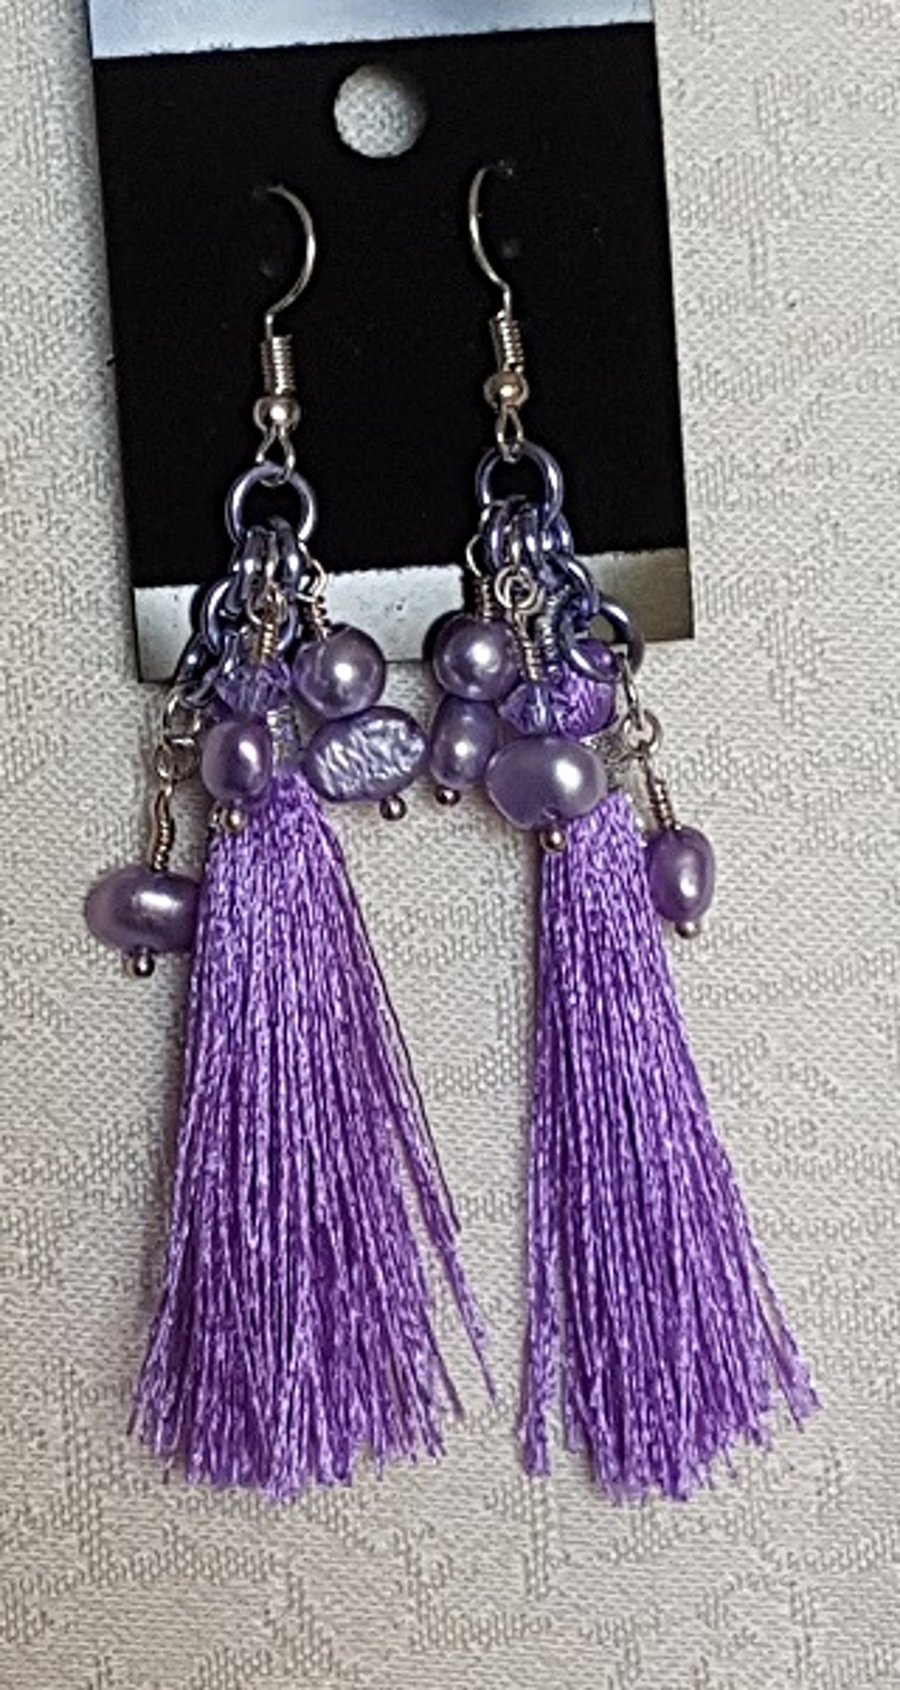 Gorgeous Purple tassel earrings with lilac pearls.